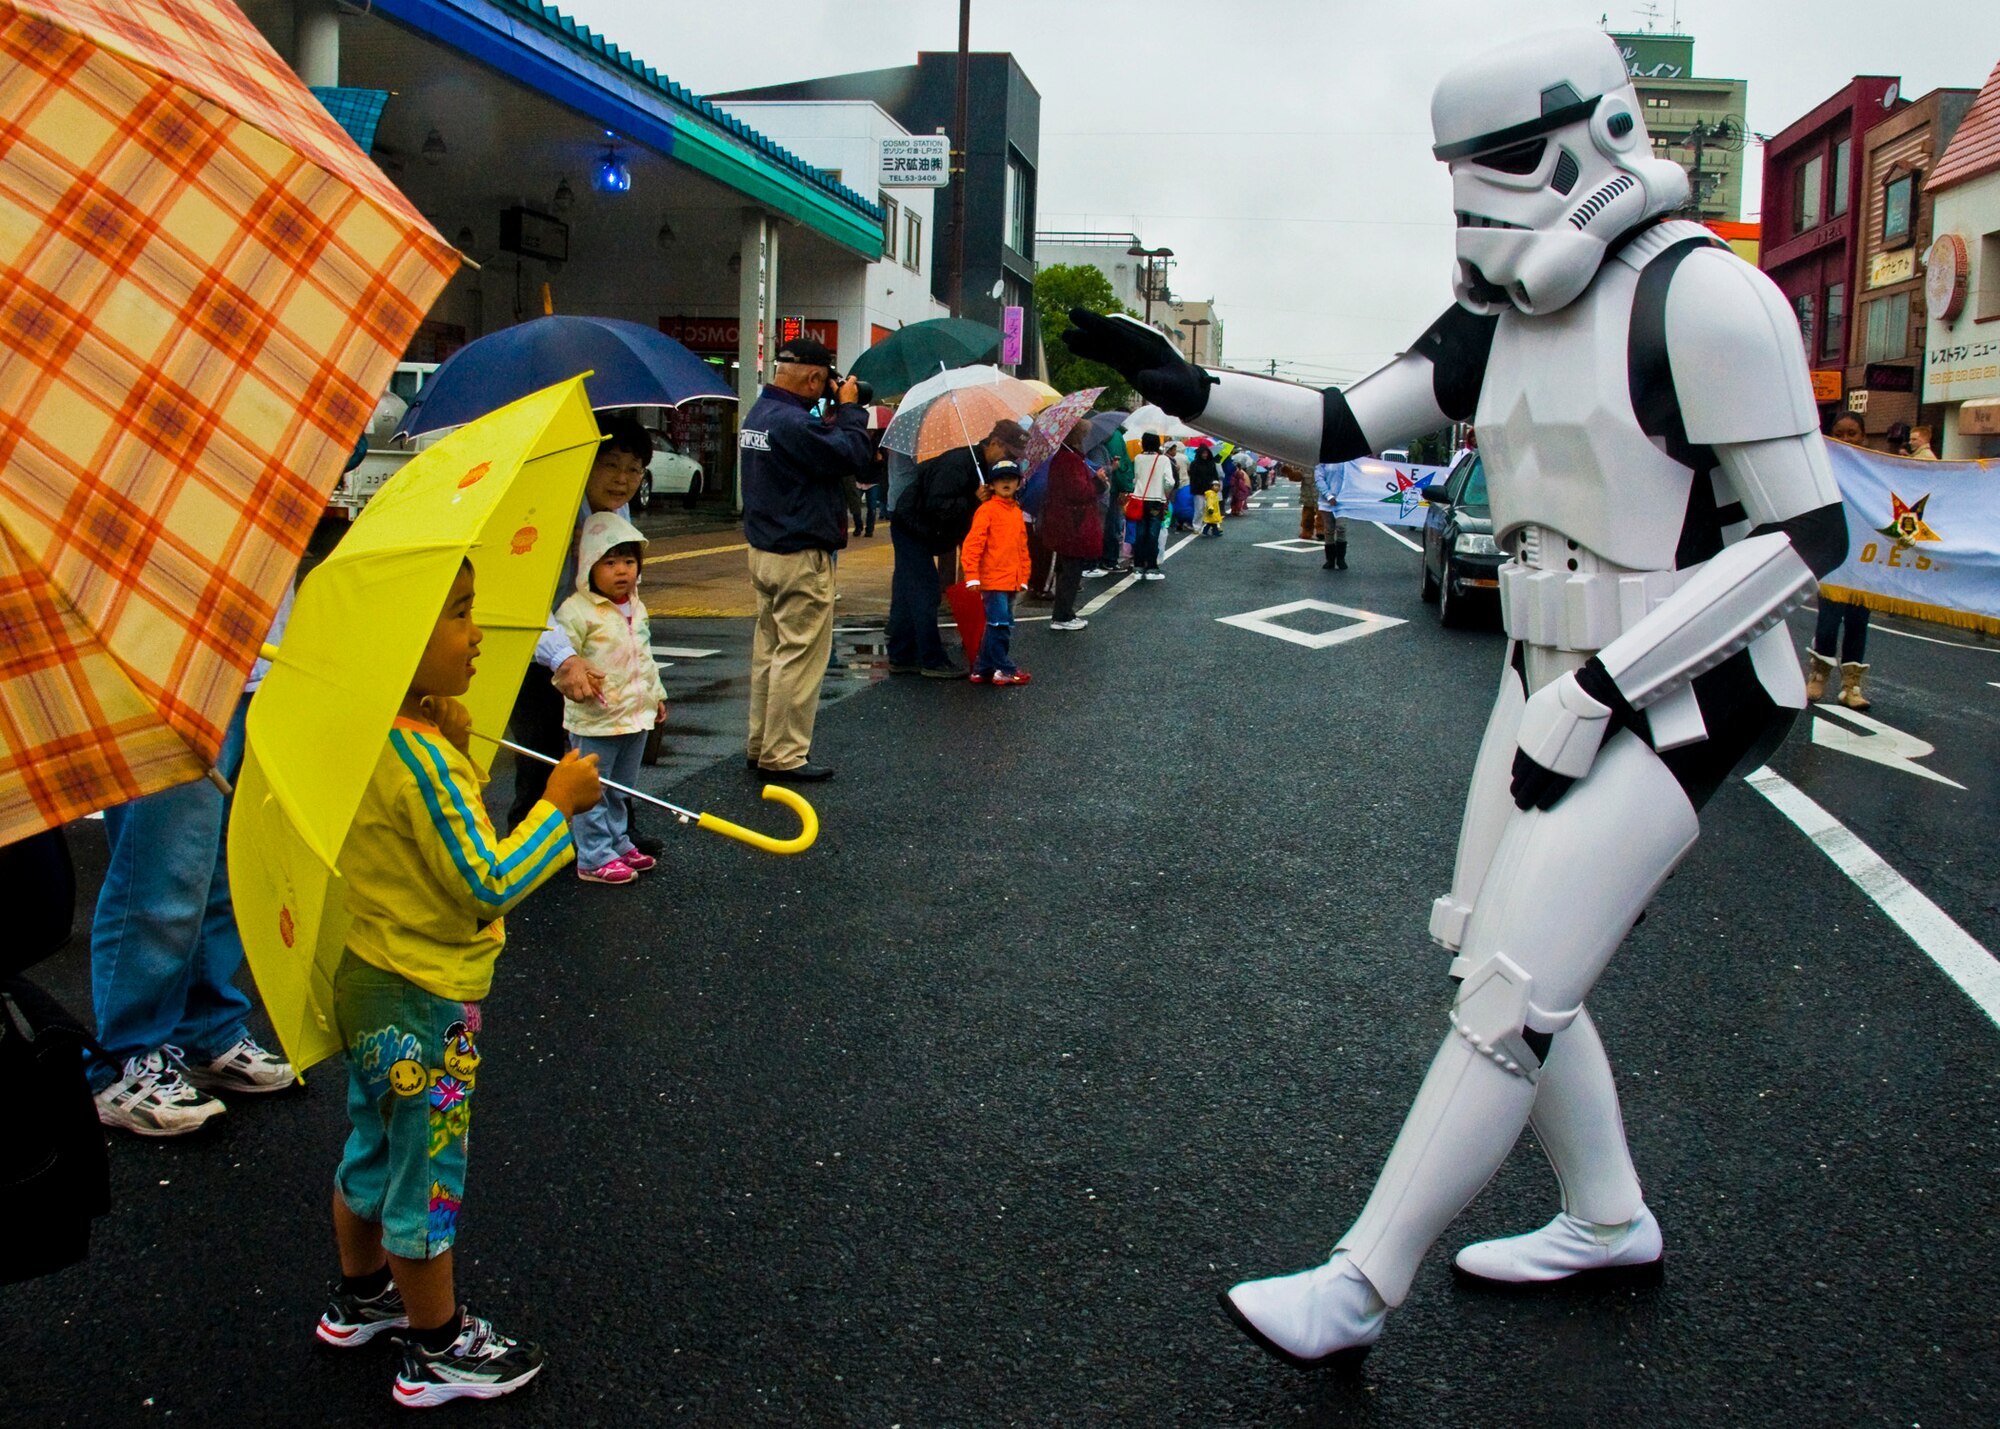 MISAWA AIR BASE, Japan -- A storm trooper waves at a Japanese boy during the American Day parade June 7, 2009. Despite the rain, Japanese and Americans came out to enjoy the parade featuring popular American characters and icons. (U.S. Air Force photo by Staff Sgt. Araceli Alarcon)
